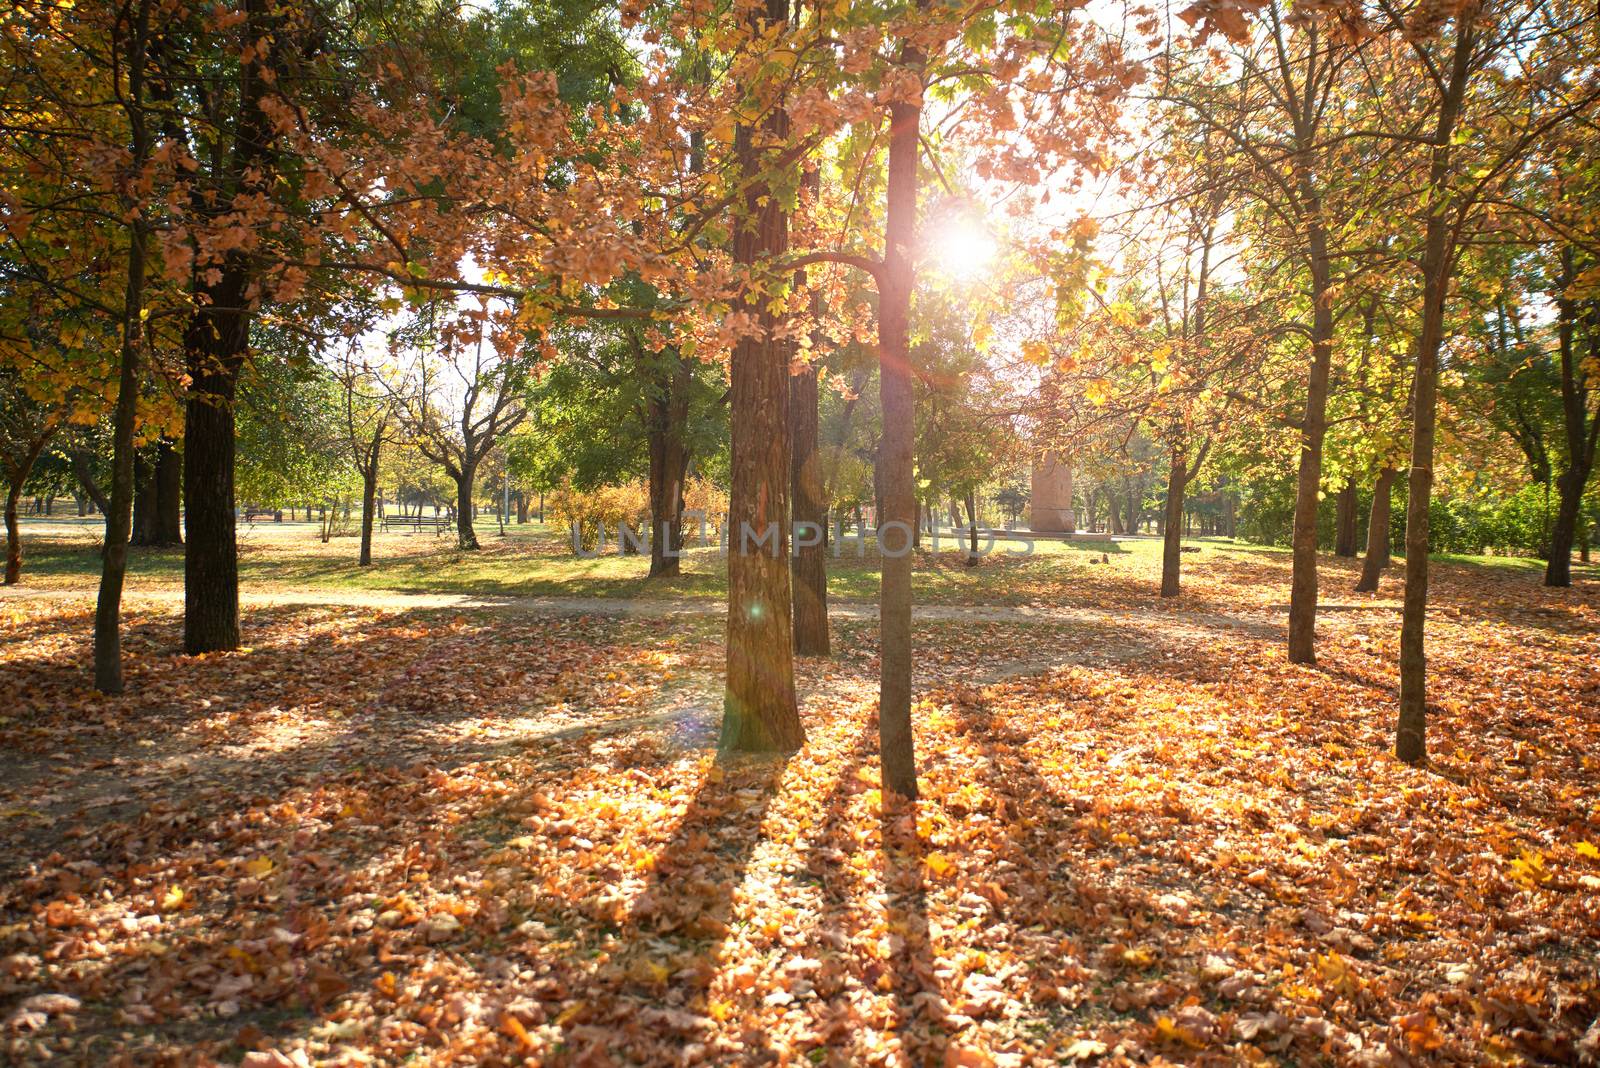 city park without people on an autumn day, bright rays of the sun shine through the crowns of maple trees